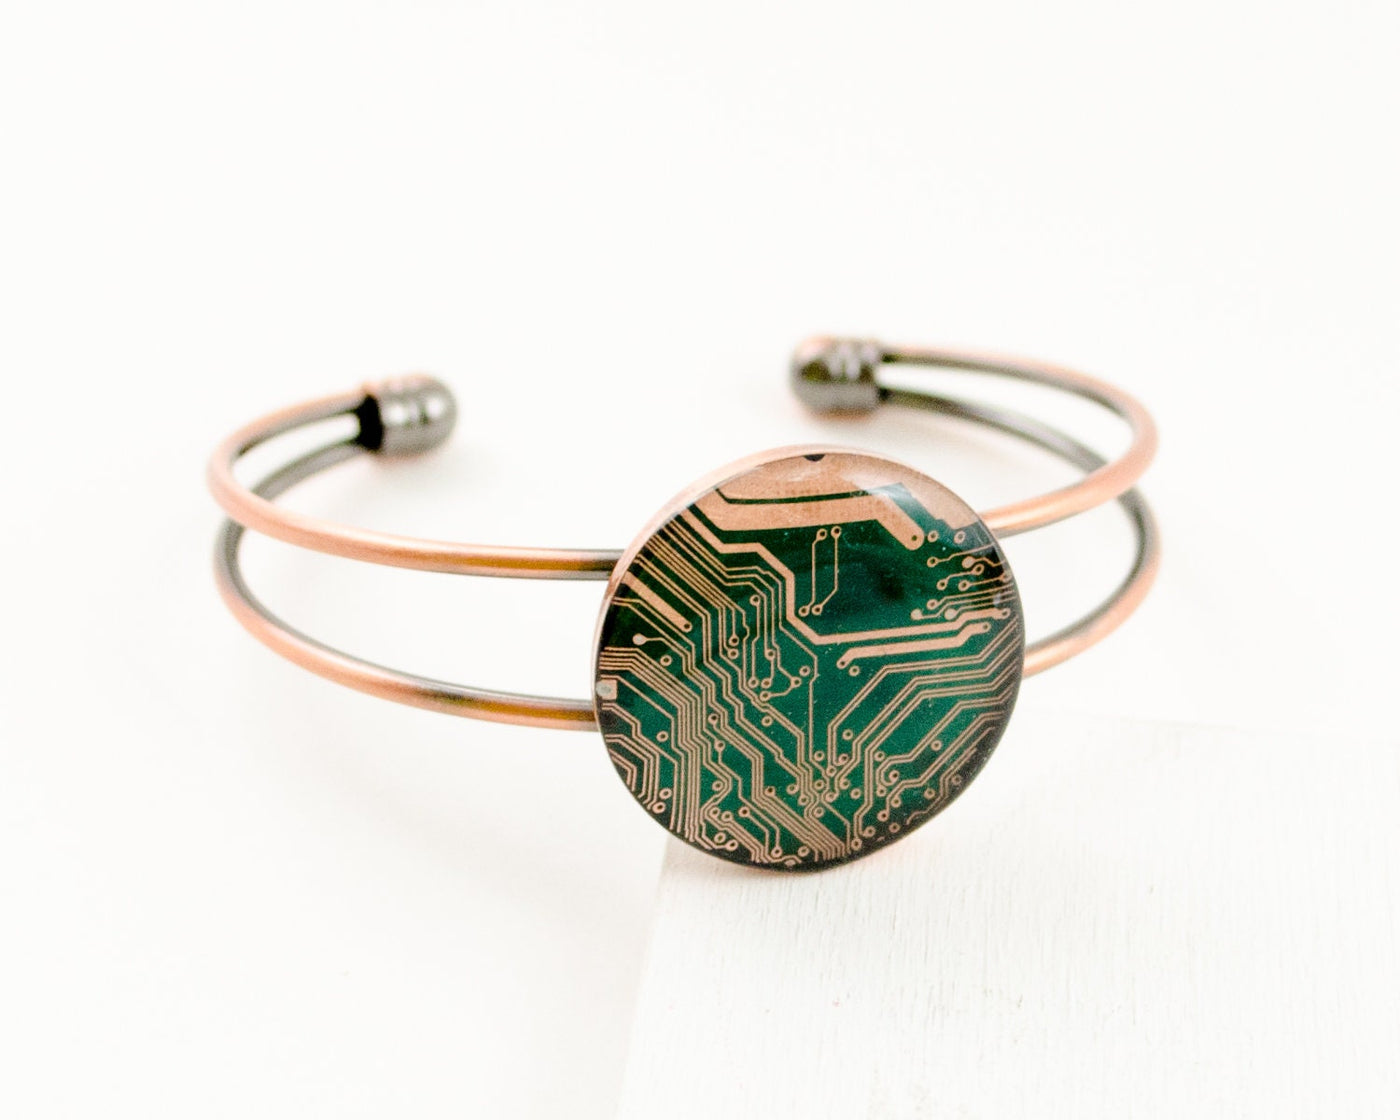 Recycled Circuit Board Bracelet, Copper Cuff, We Do Geek, Information Technology, Electrical Engineer, Geeky Bracelet, Circuit Board Jewelry